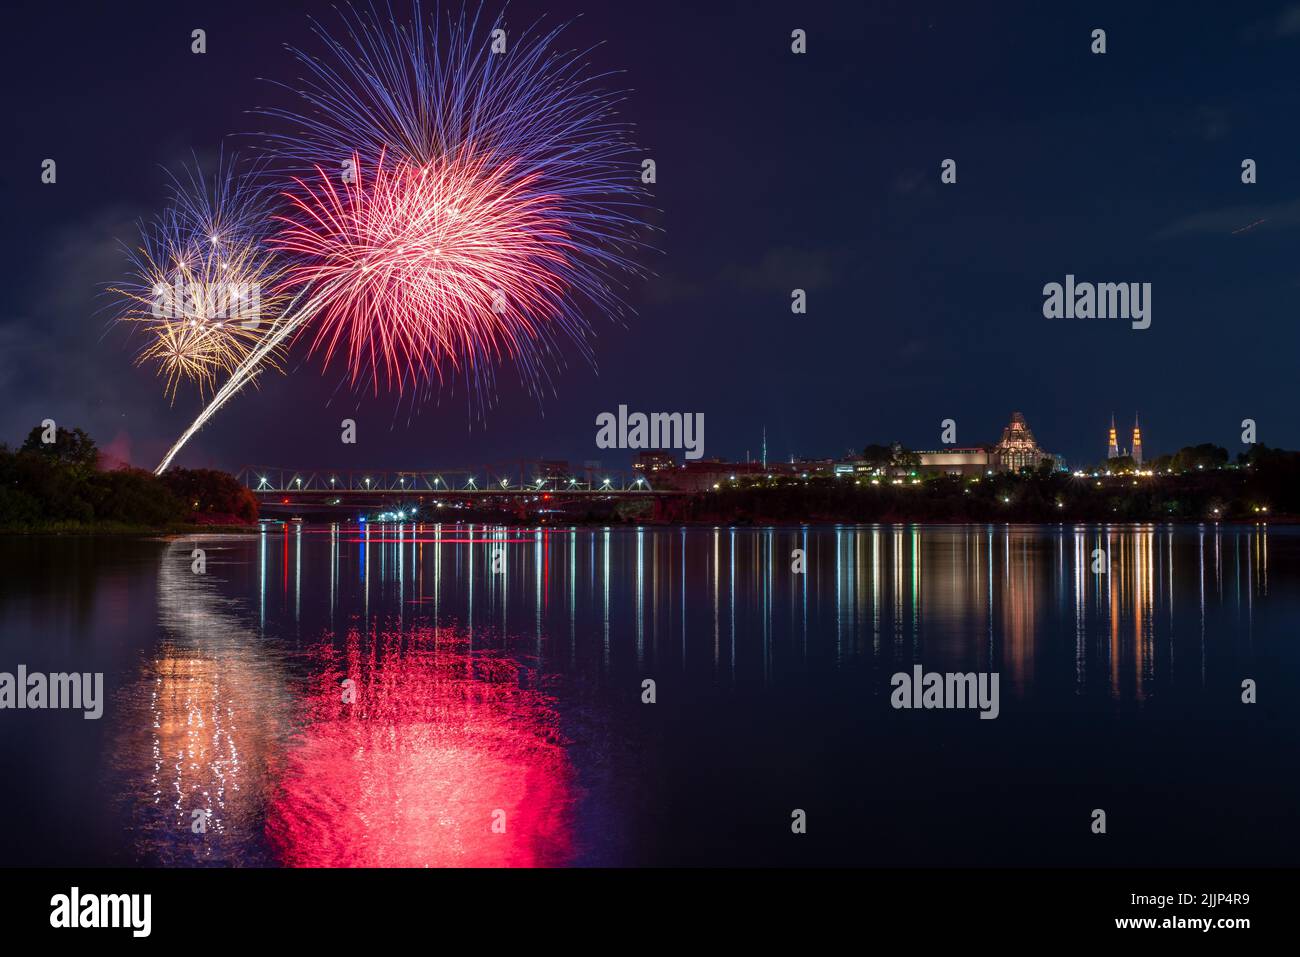 A beautiful view of fireworks in the night sky over the lake by the city Stock Photo